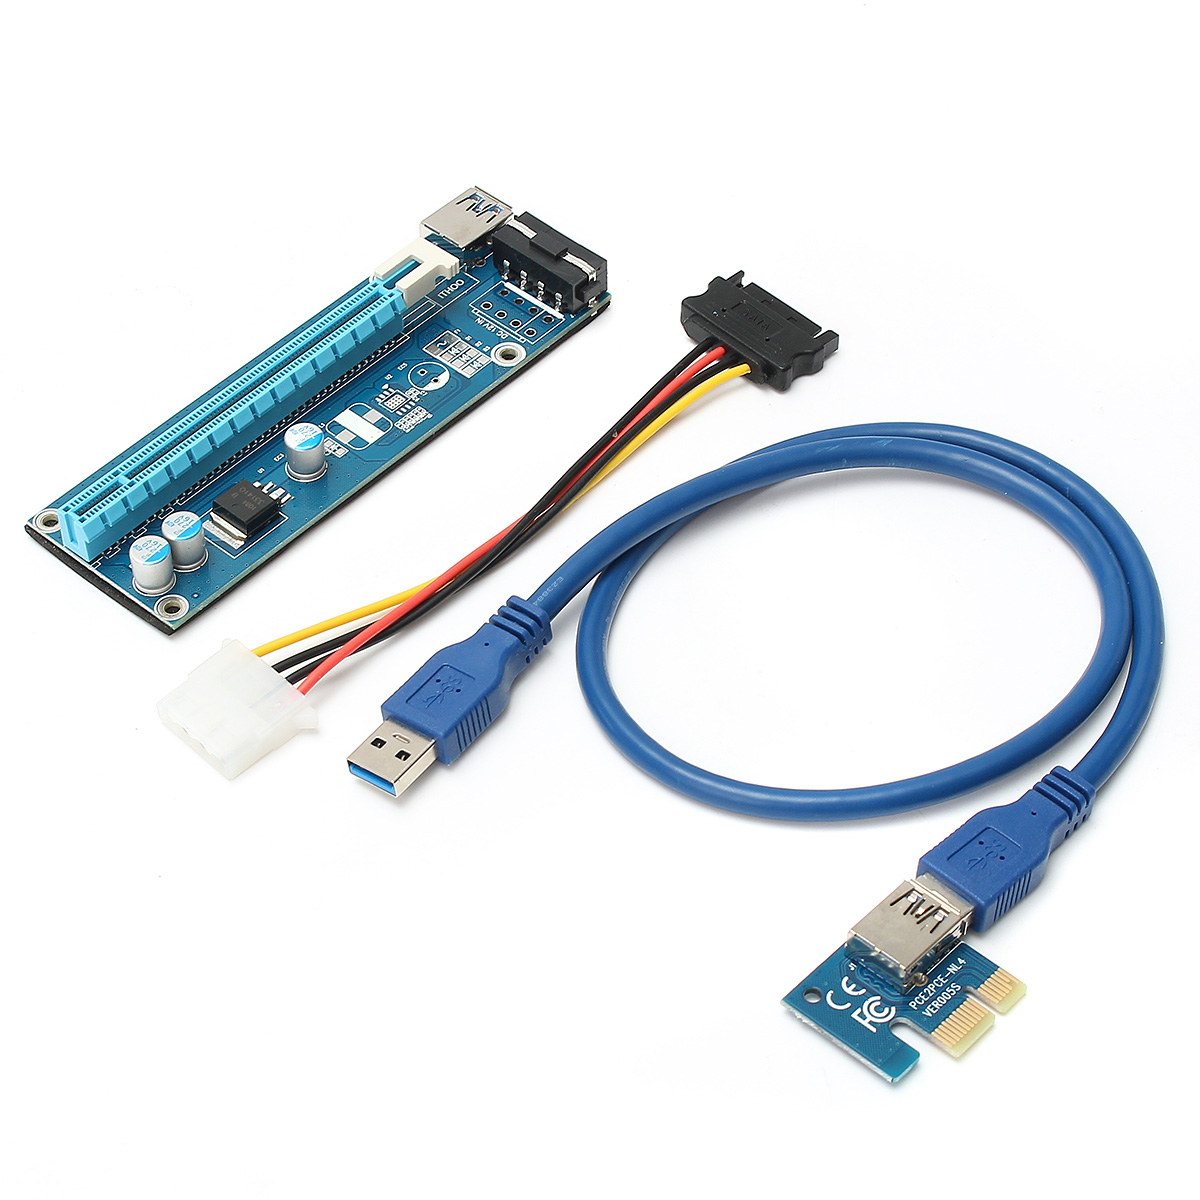 

0.6m USB 3.0 PCI-E Express 1x To 16x Extension Cable Extender Riser Card Adapter for Mining